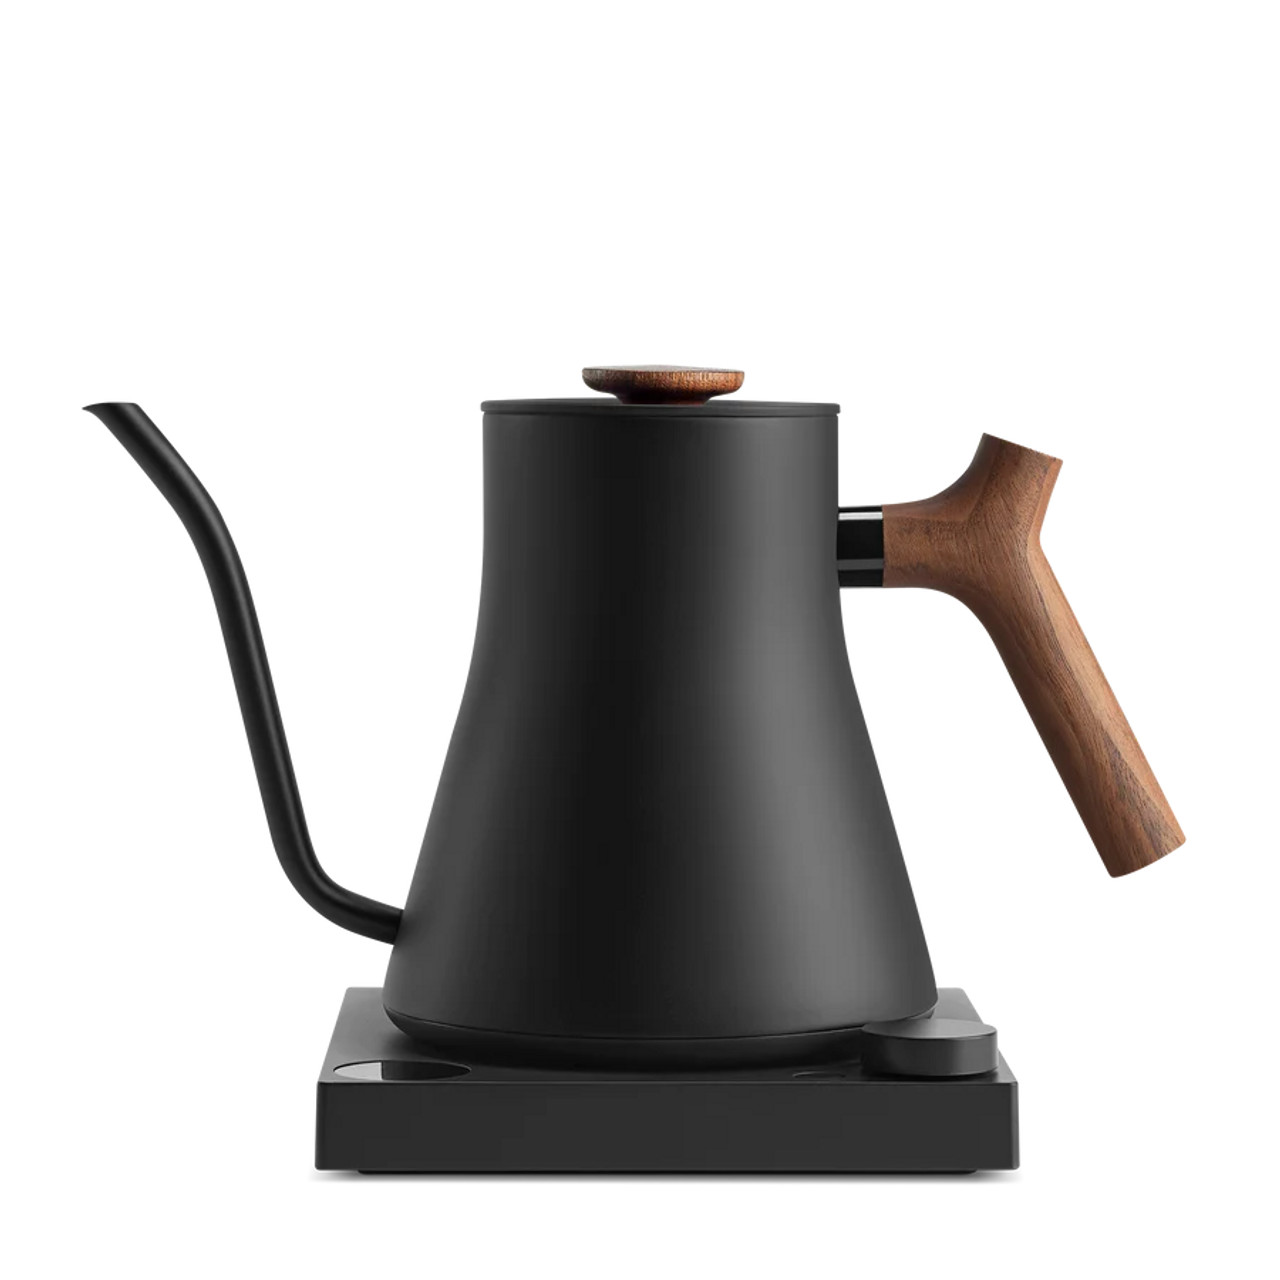 https://cdn11.bigcommerce.com/s-bjqt1yp5q3/images/stencil/1280x1280/products/7318/26490/Fellow_Stagg_Erg_Pro_Electric_Kettle_Black_and_Wood_1__59216.1685565097.jpg?c=1